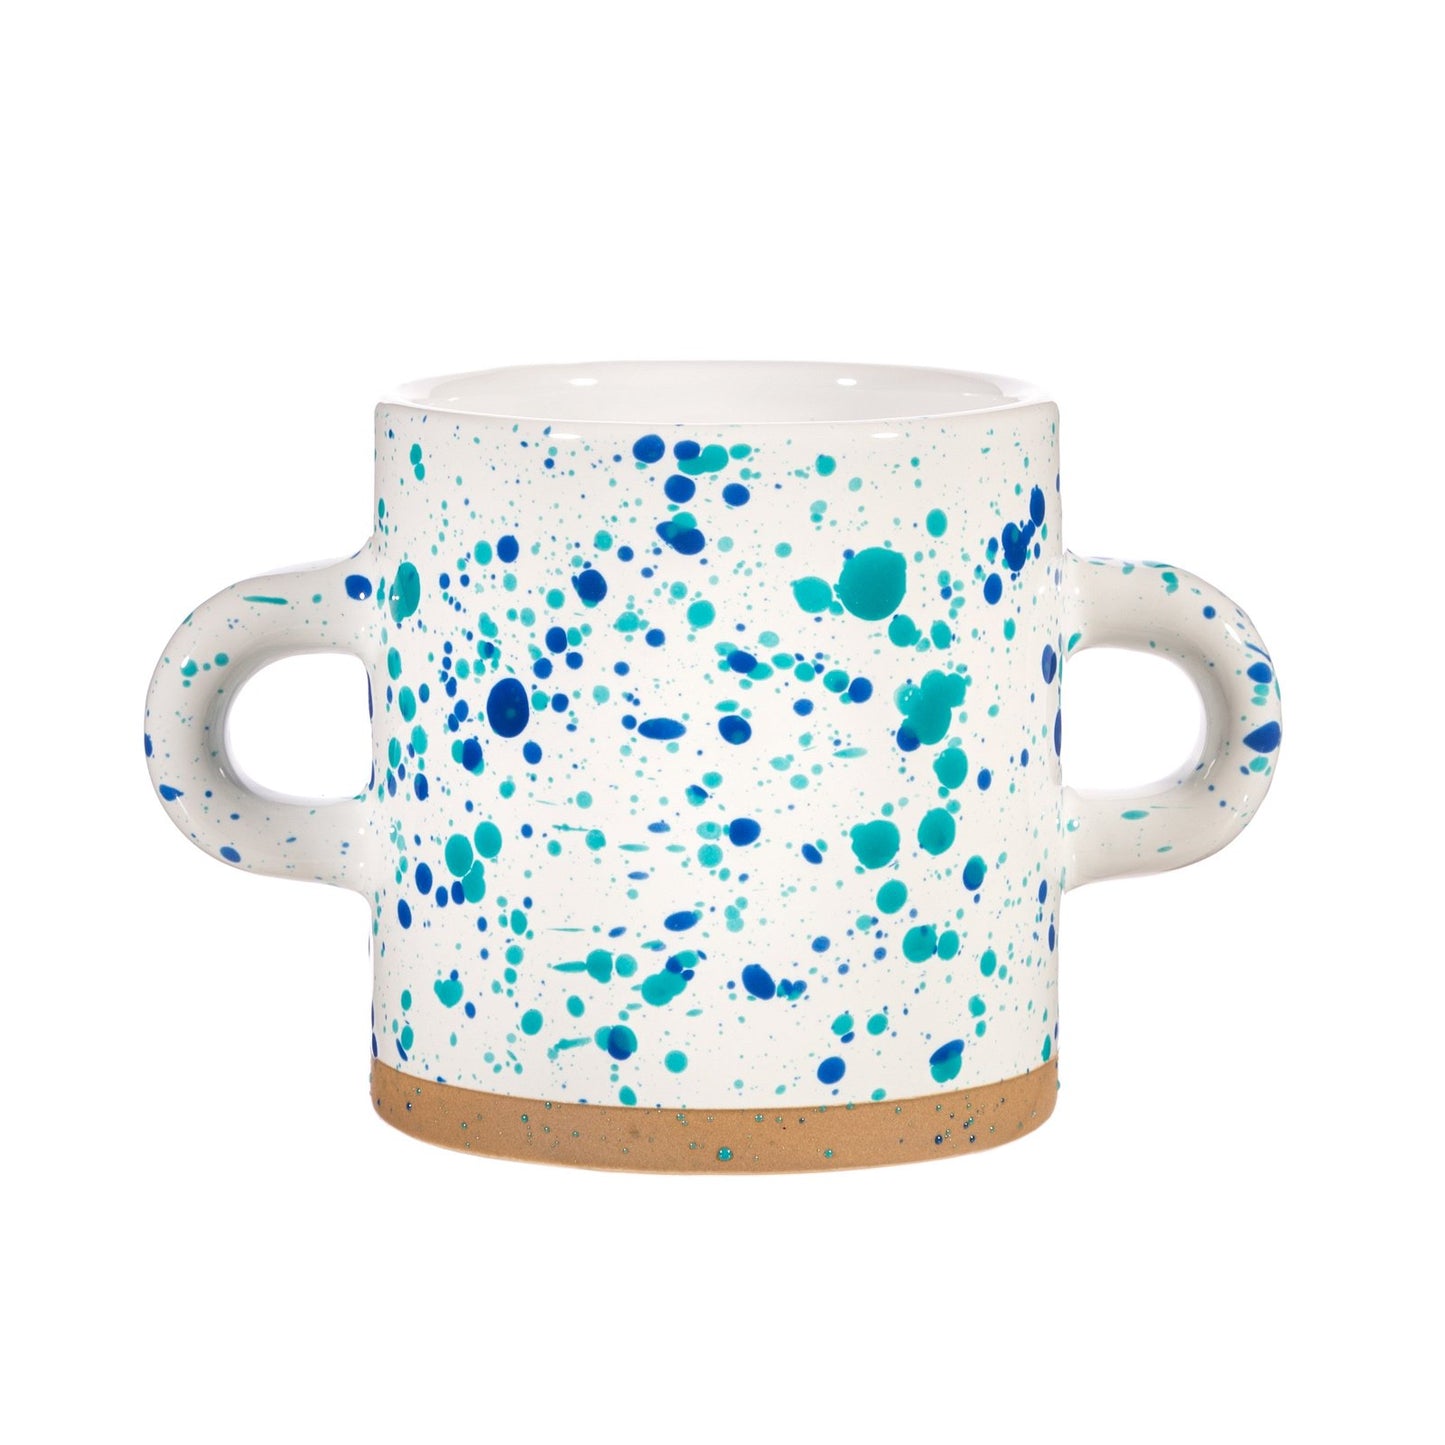 Turquoise and Blue Splatterware Planter - a Cheeky Plant